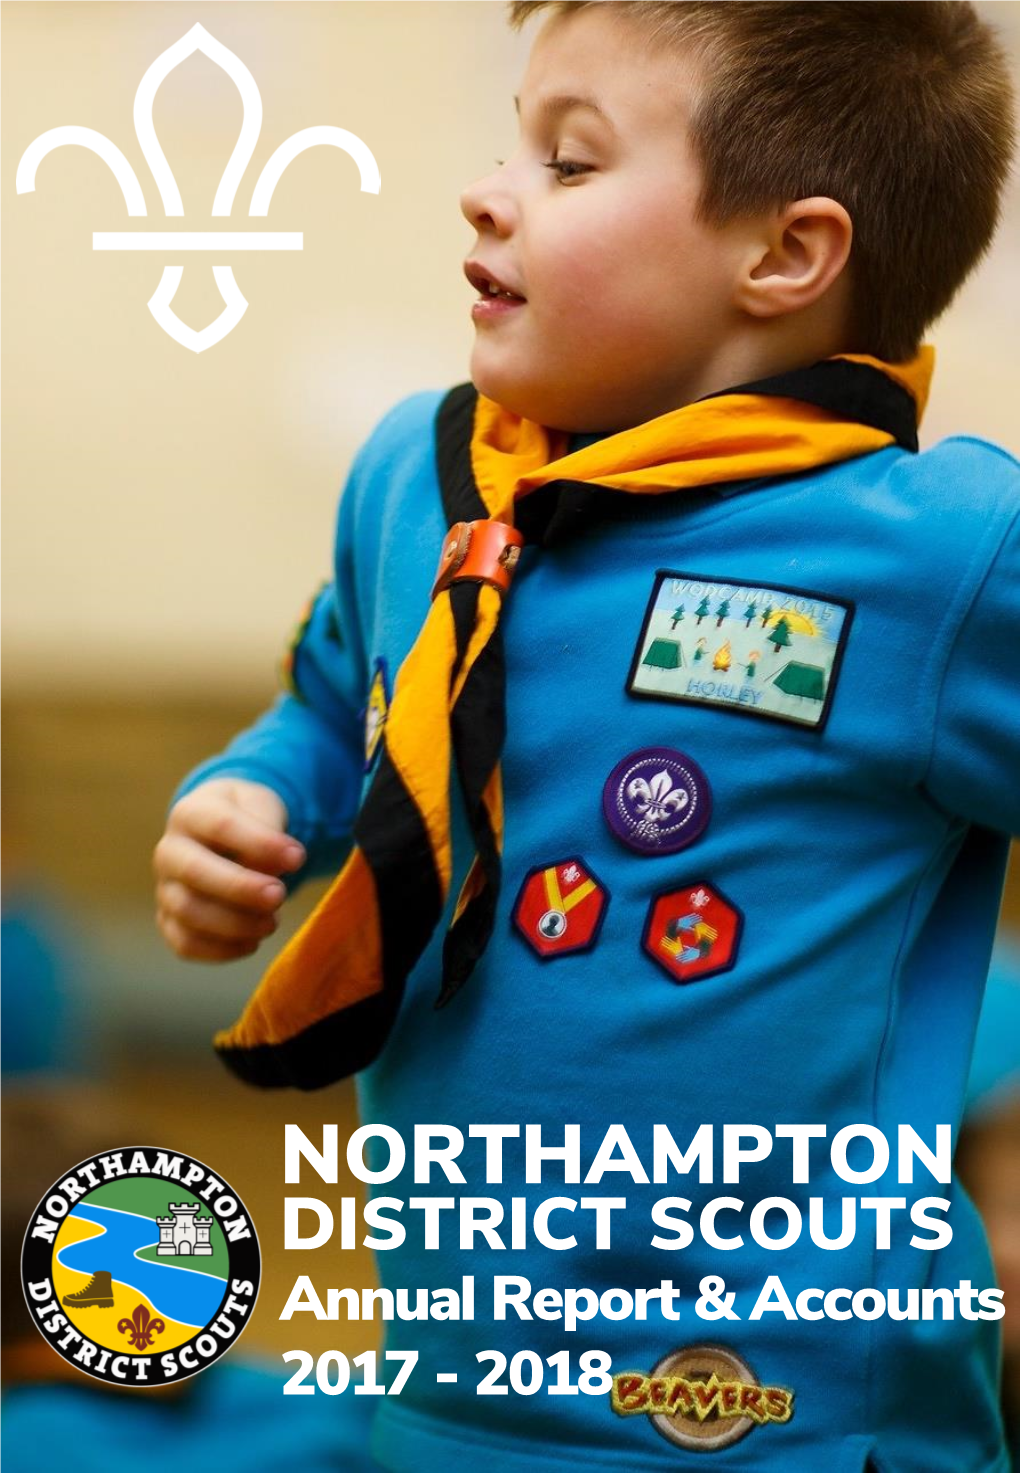 NORTHAMPTON DISTRICT SCOUTS Annual Report & Accounts 2017 - 2018 Northampton District Scouts